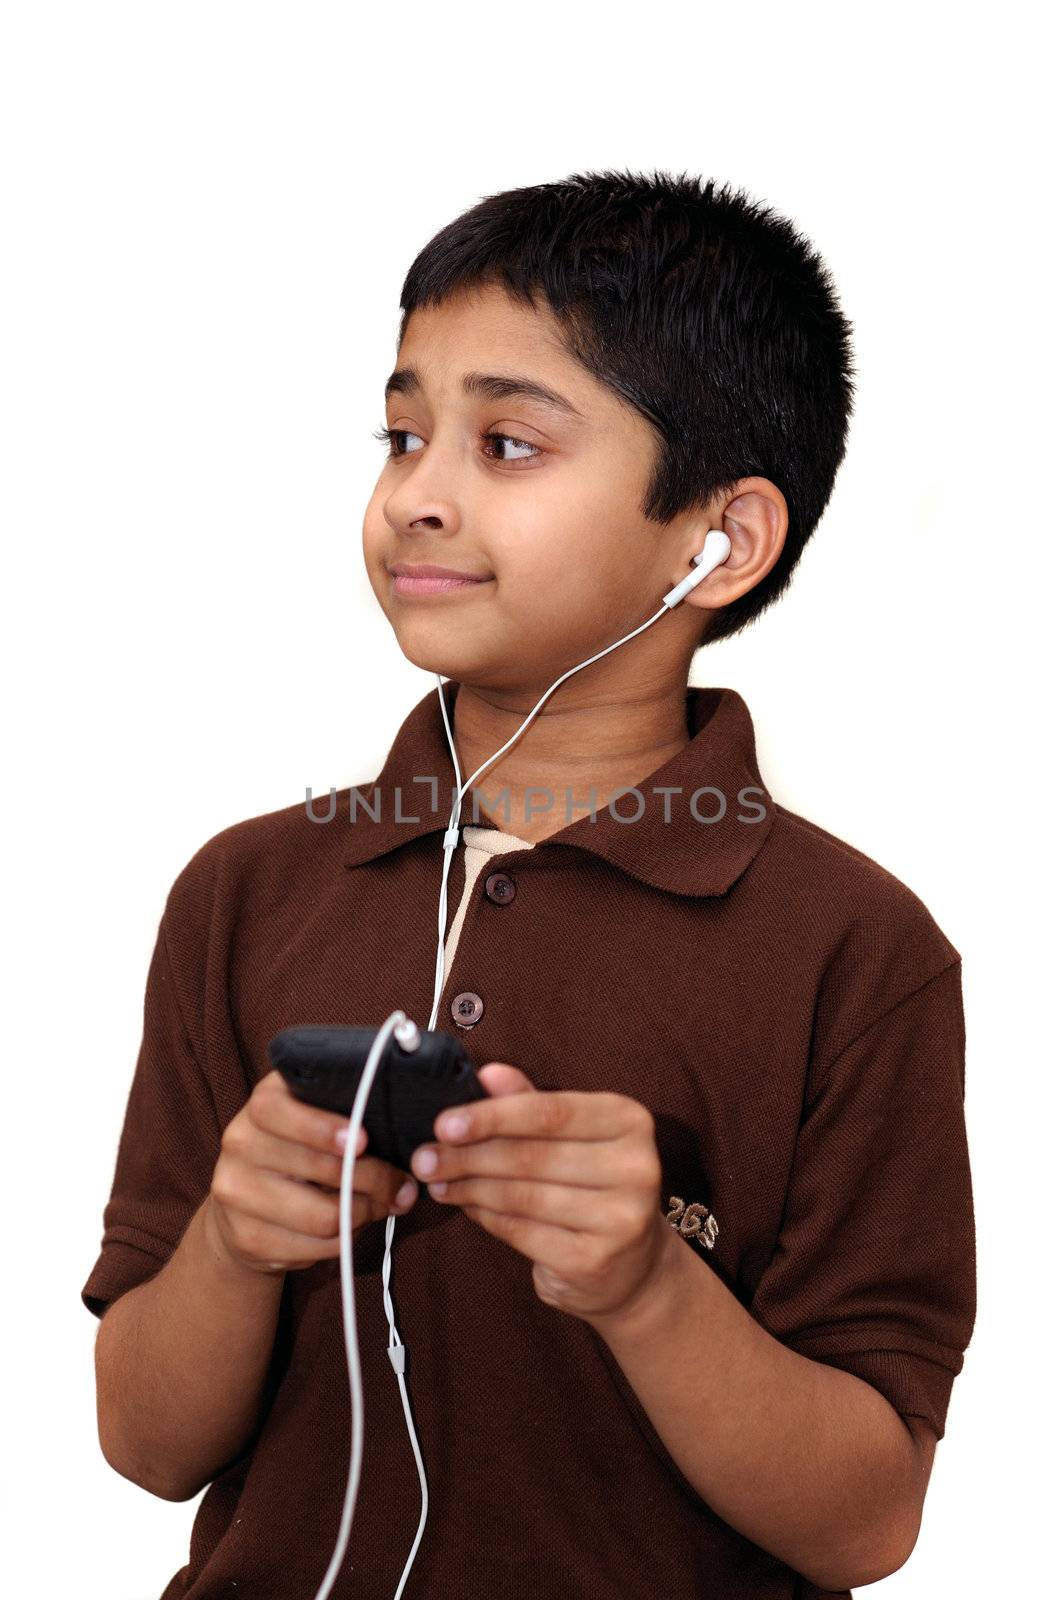 An handsome Indian kid hearing music with headphones